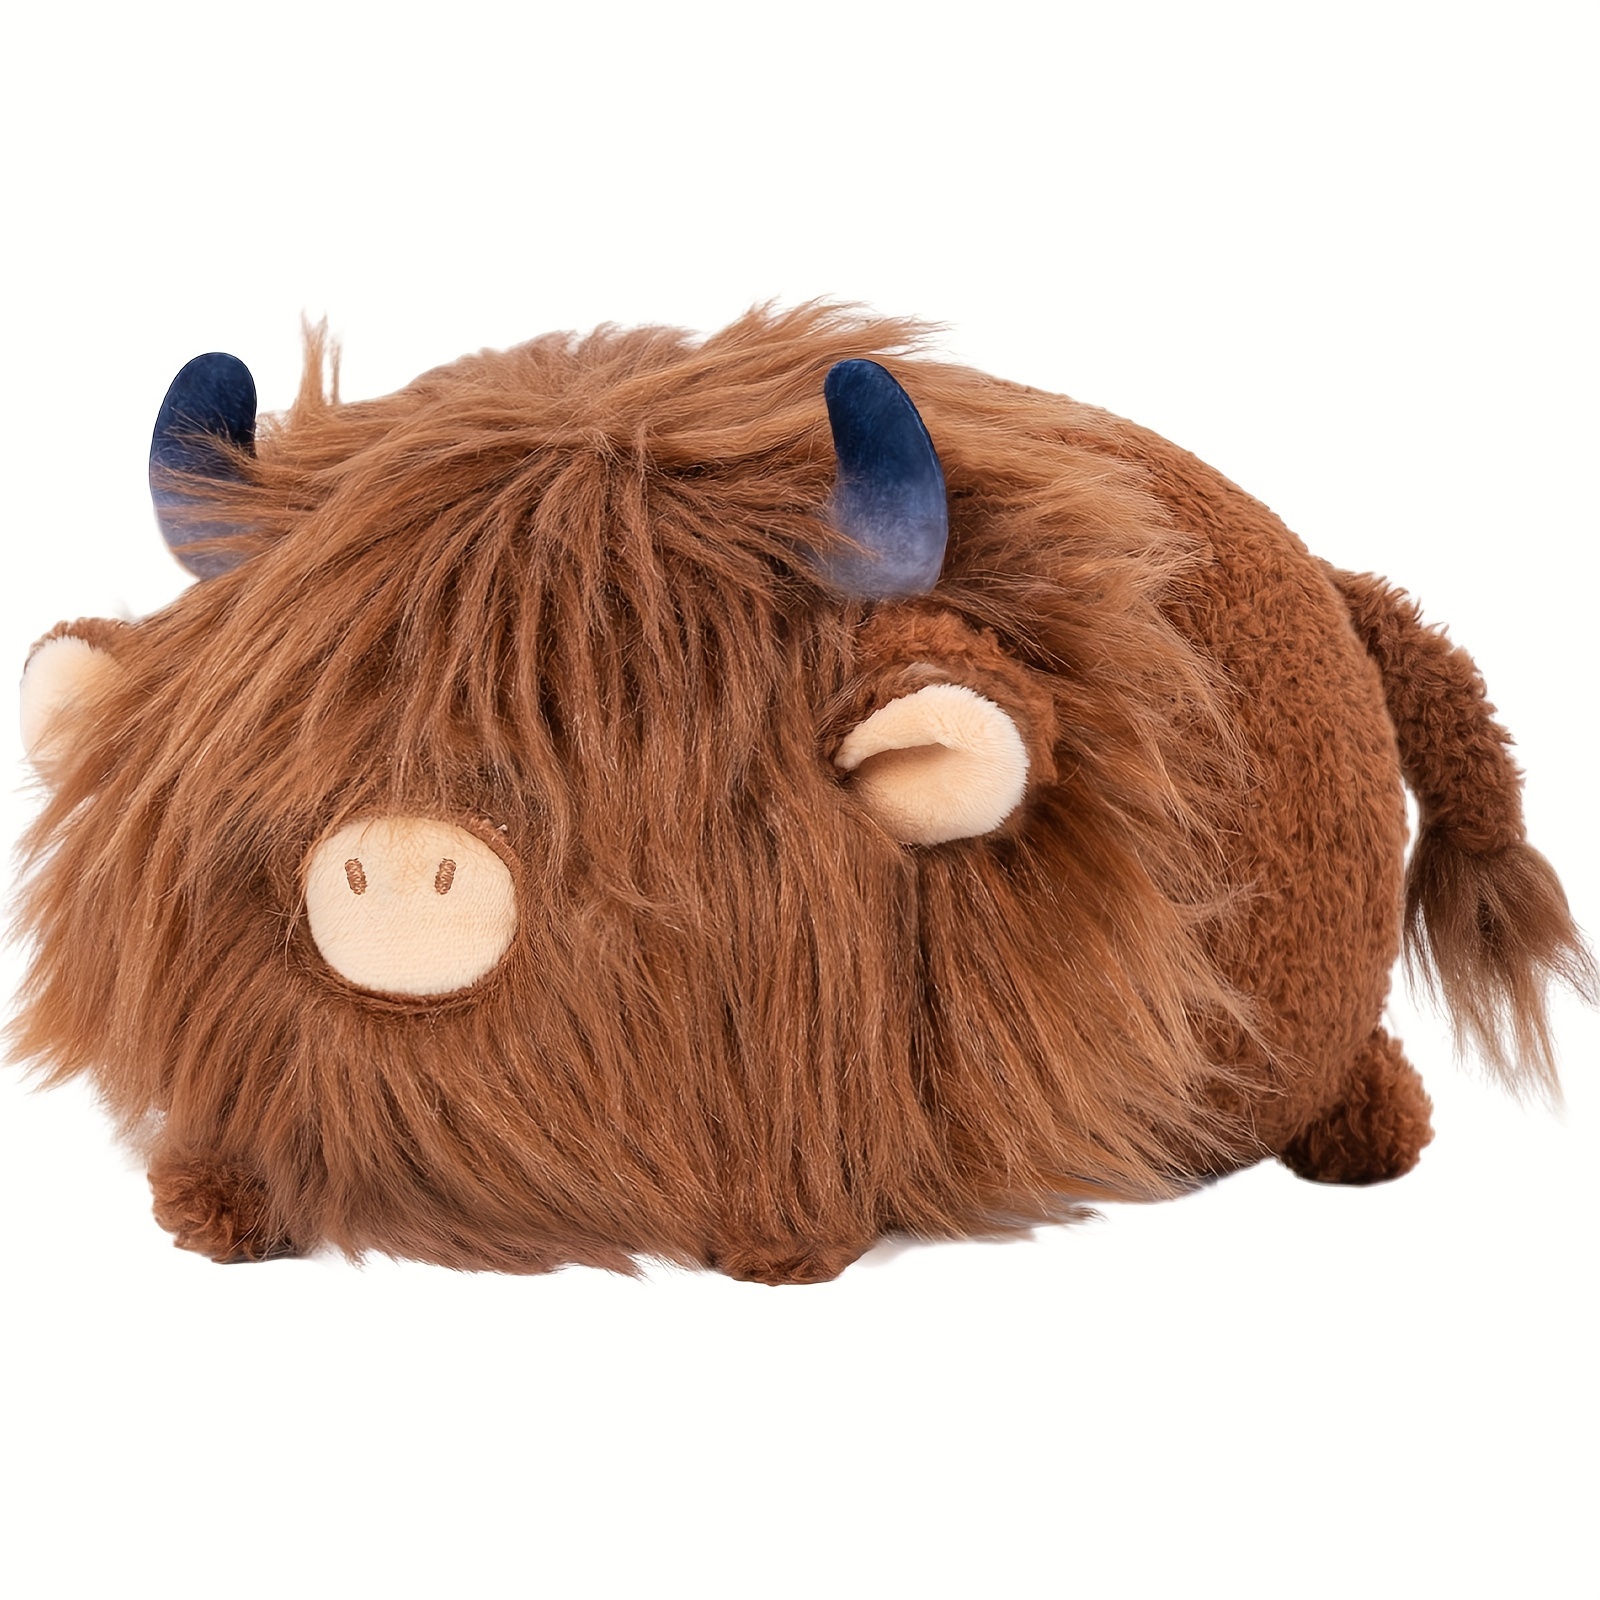 

Mewaii Cute Highland Cow Plush Pillow, 7inch Cow Stuffed Toy, Highland Cow Plushies, Soft Squishy Gifts